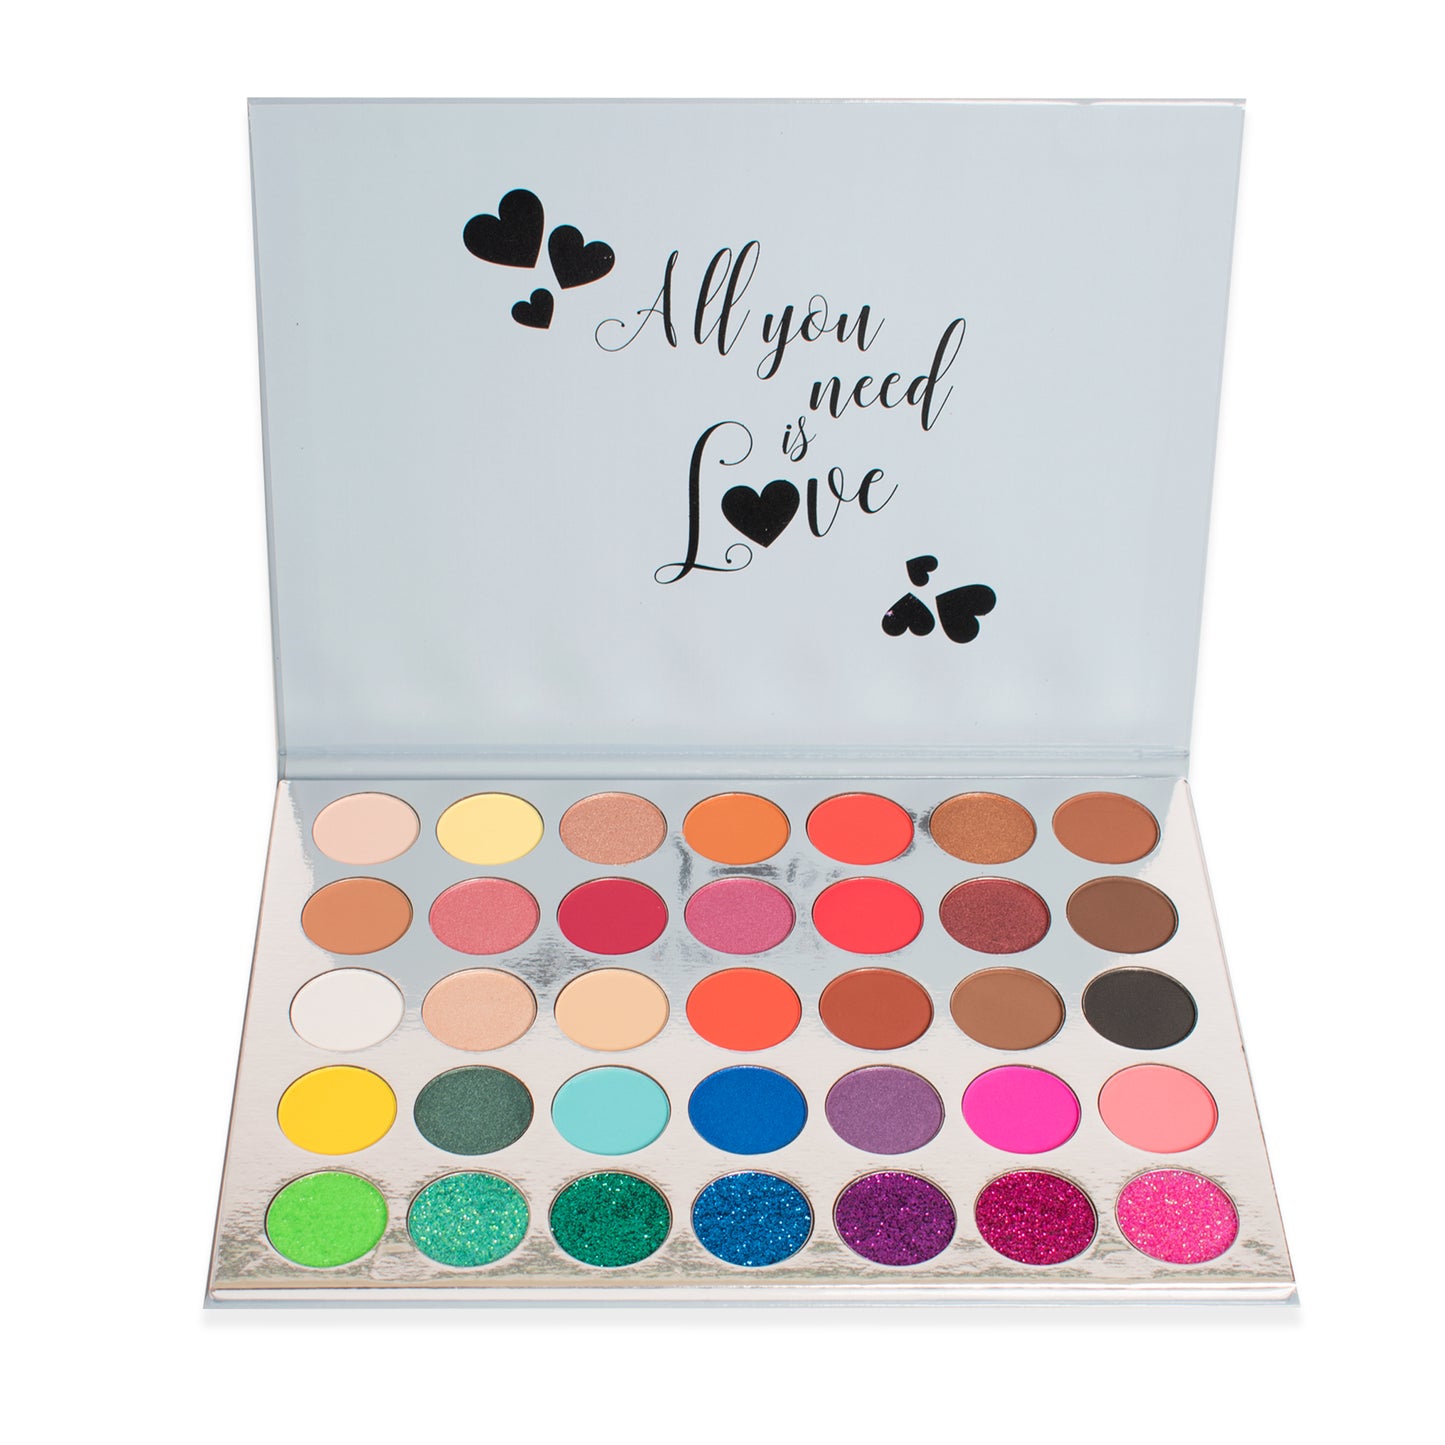 BOSS BEAUTY “ALL YOU NEED IS LOVE” PALETTE